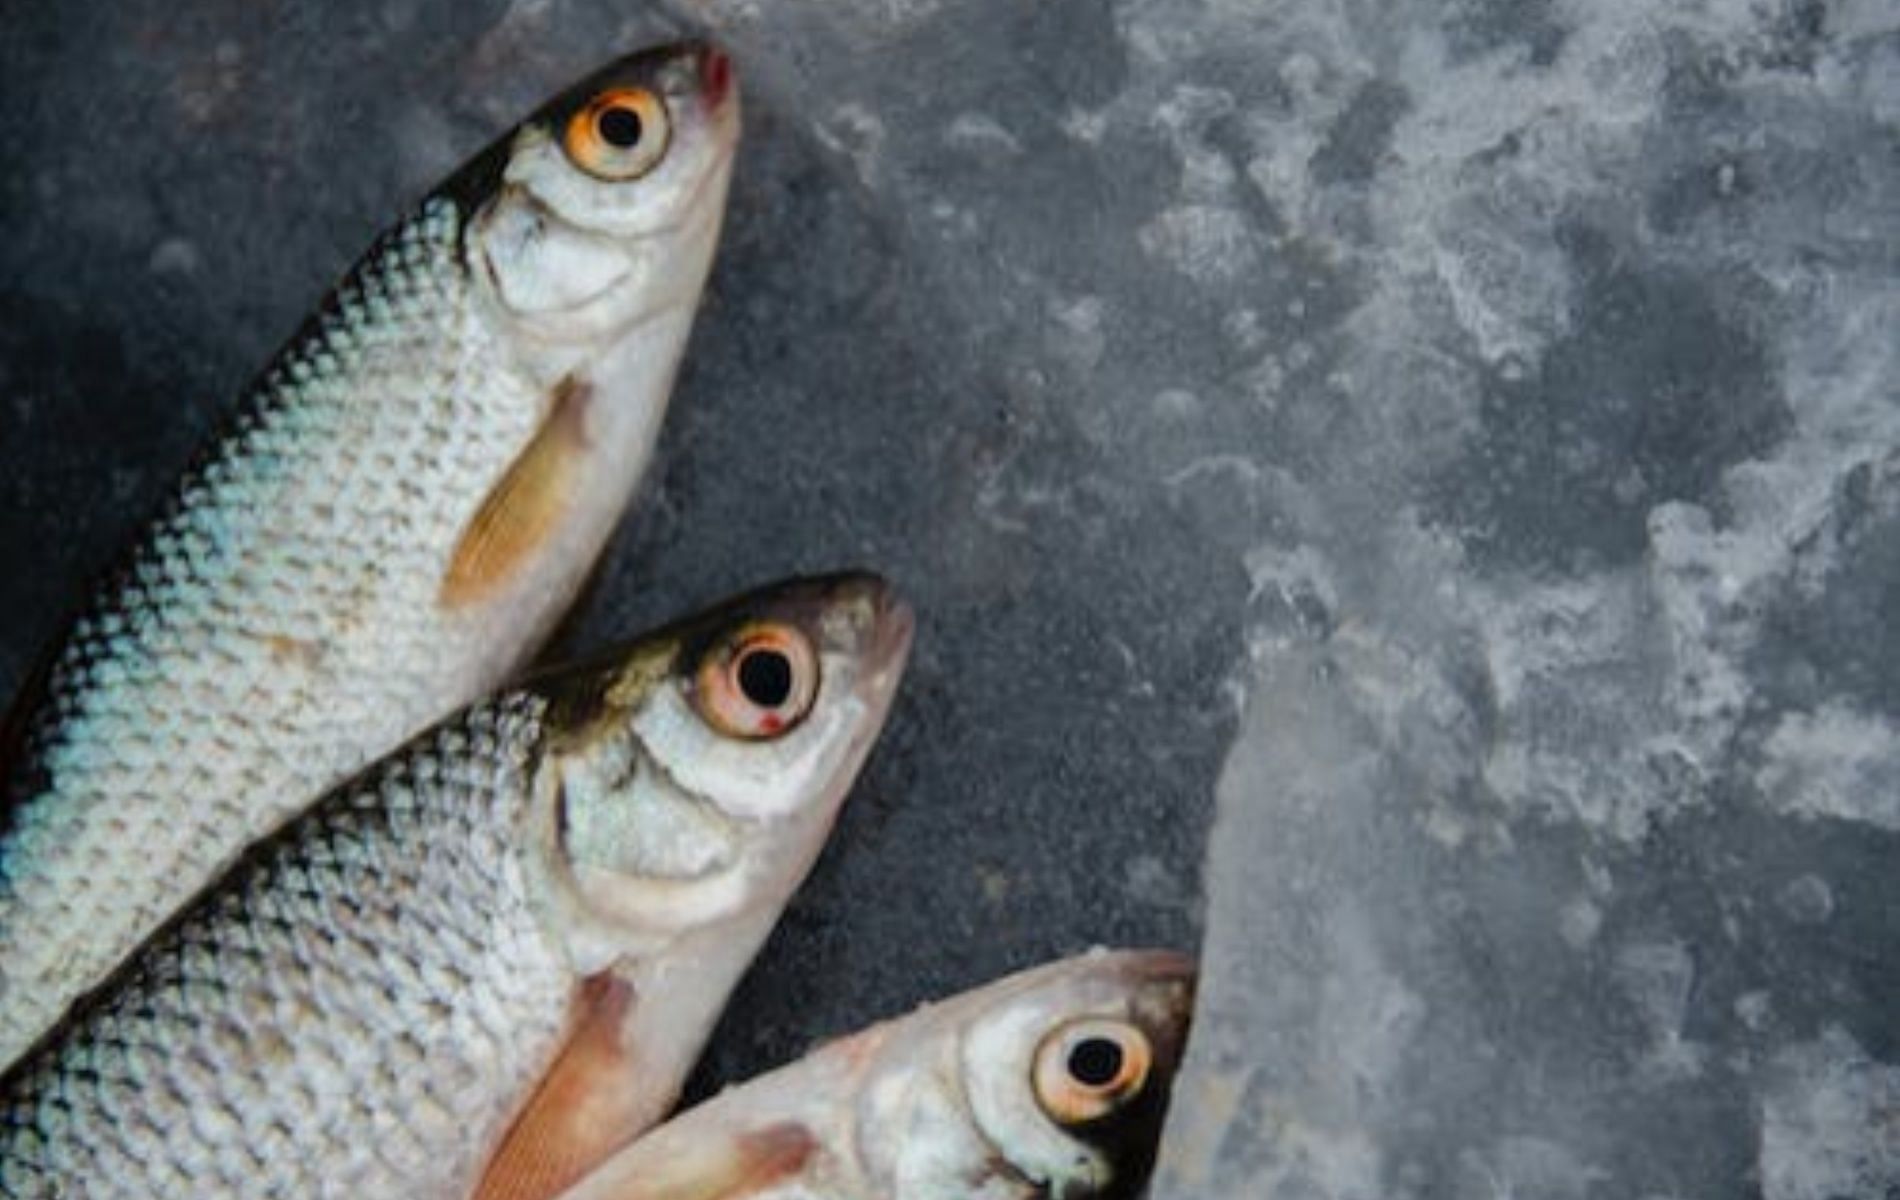 The Herring is an affordable option of a good source of Vitamin D (Image via Pexels)